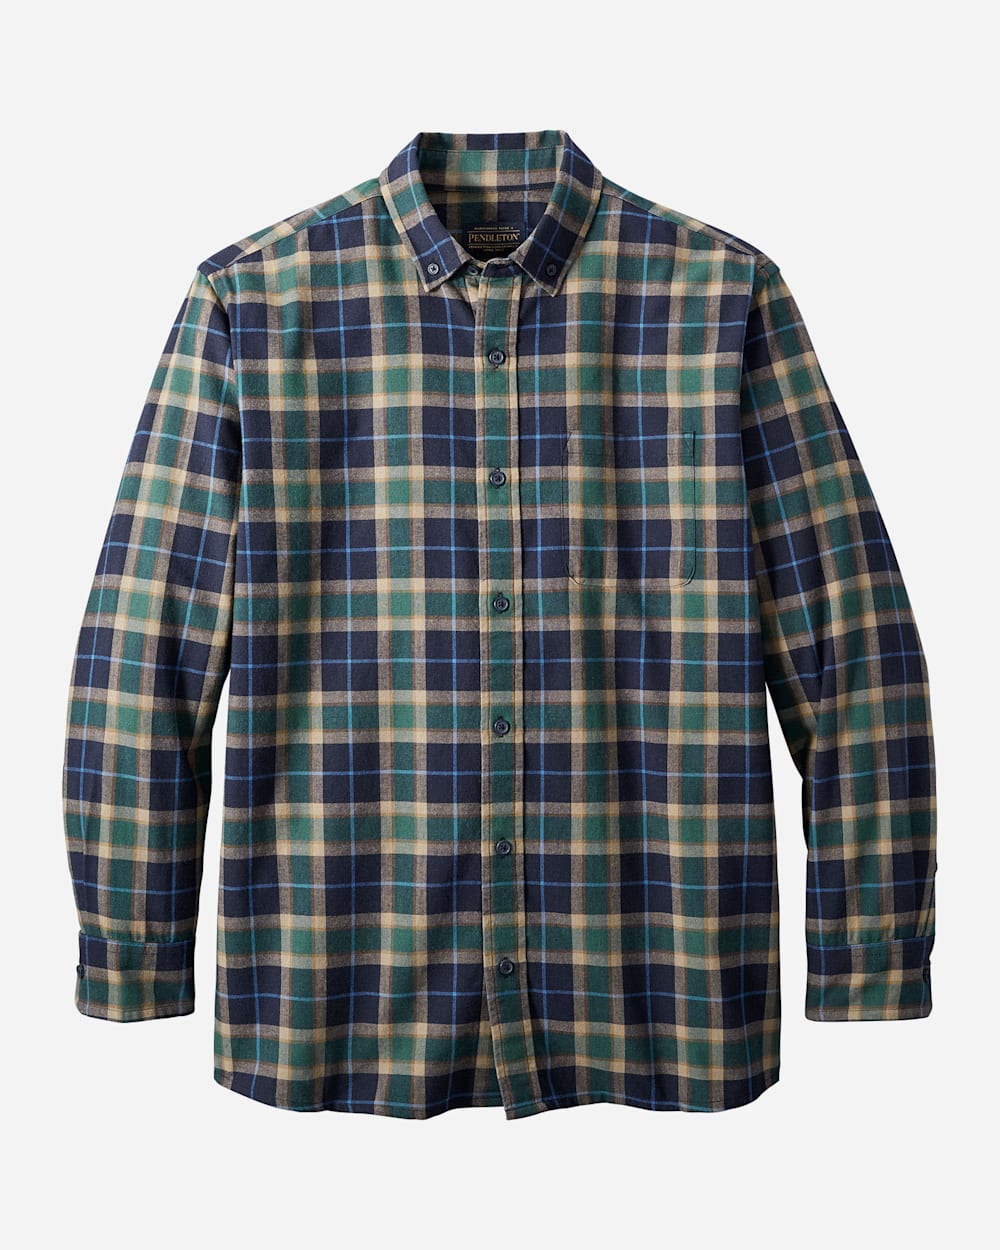 MEN'S SOMERSET BUTTON-DOWN SHIRT IN NAVY/GREEN PLAID image number 1